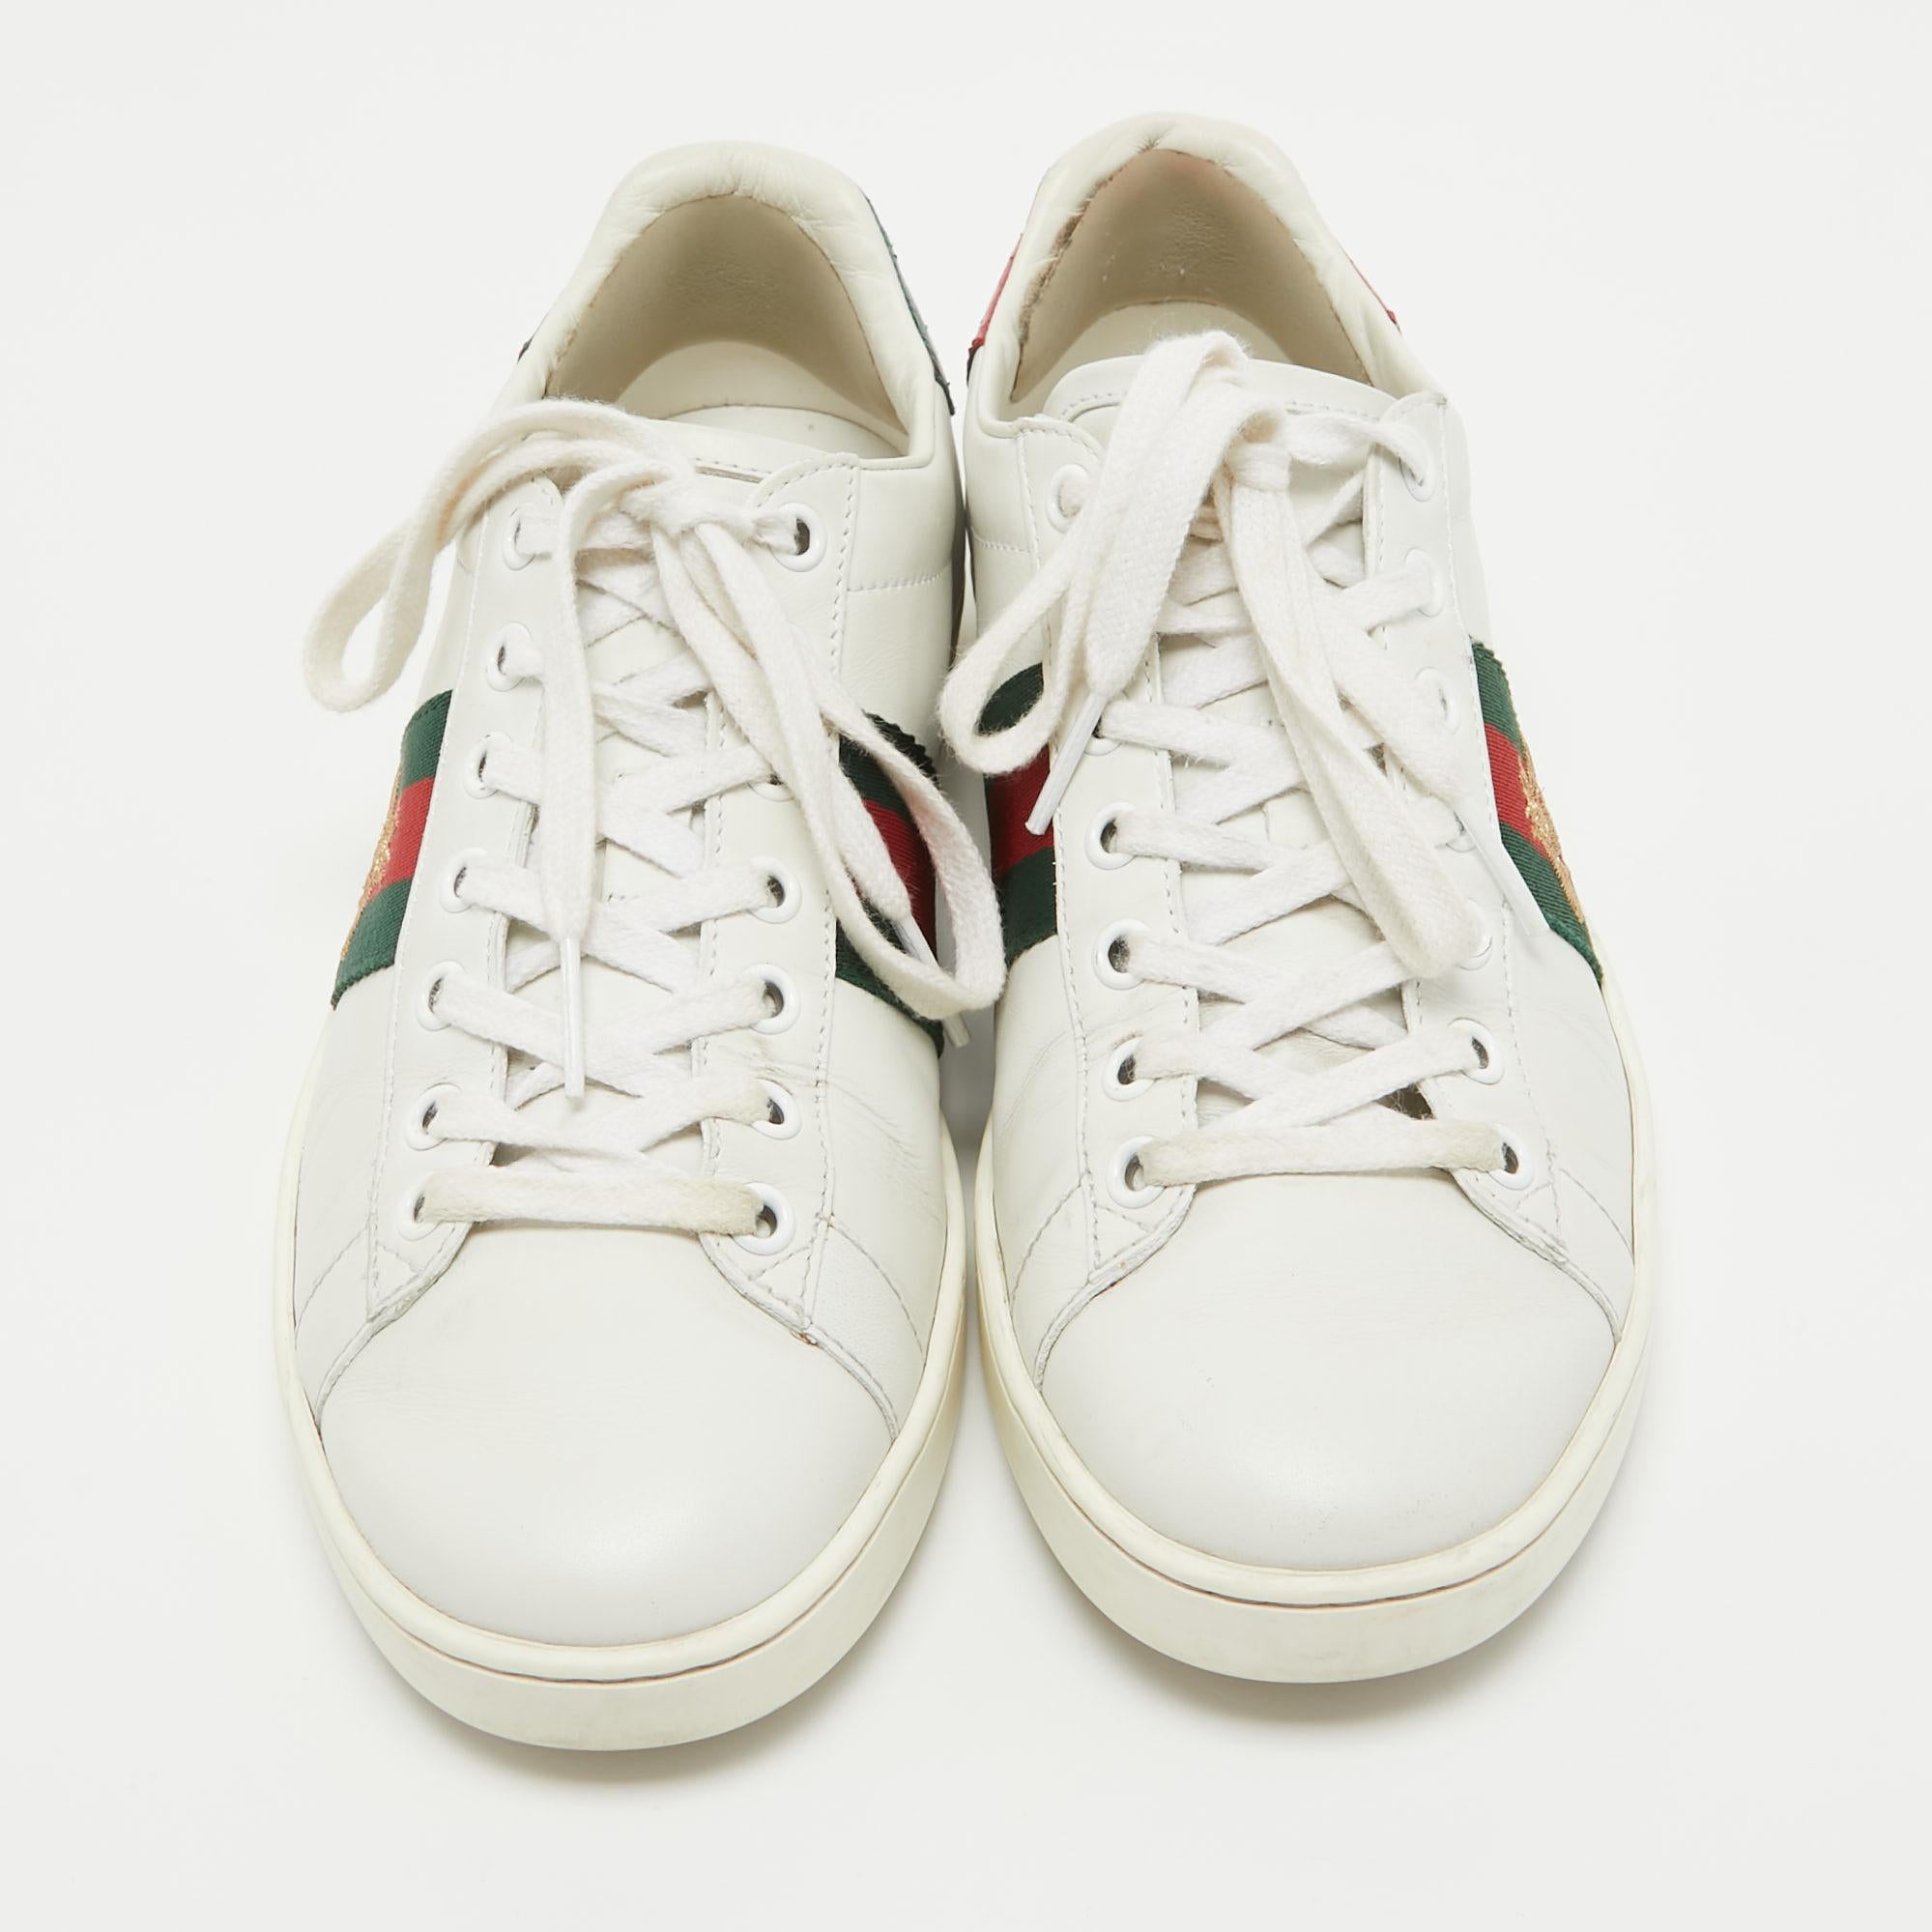 Let this comfortable pair be your first choice when you're out for a long day. These Gucci white Ace shoes have well-sewn uppers beautifully set on durable soles.

Includes: Original Dustbag

